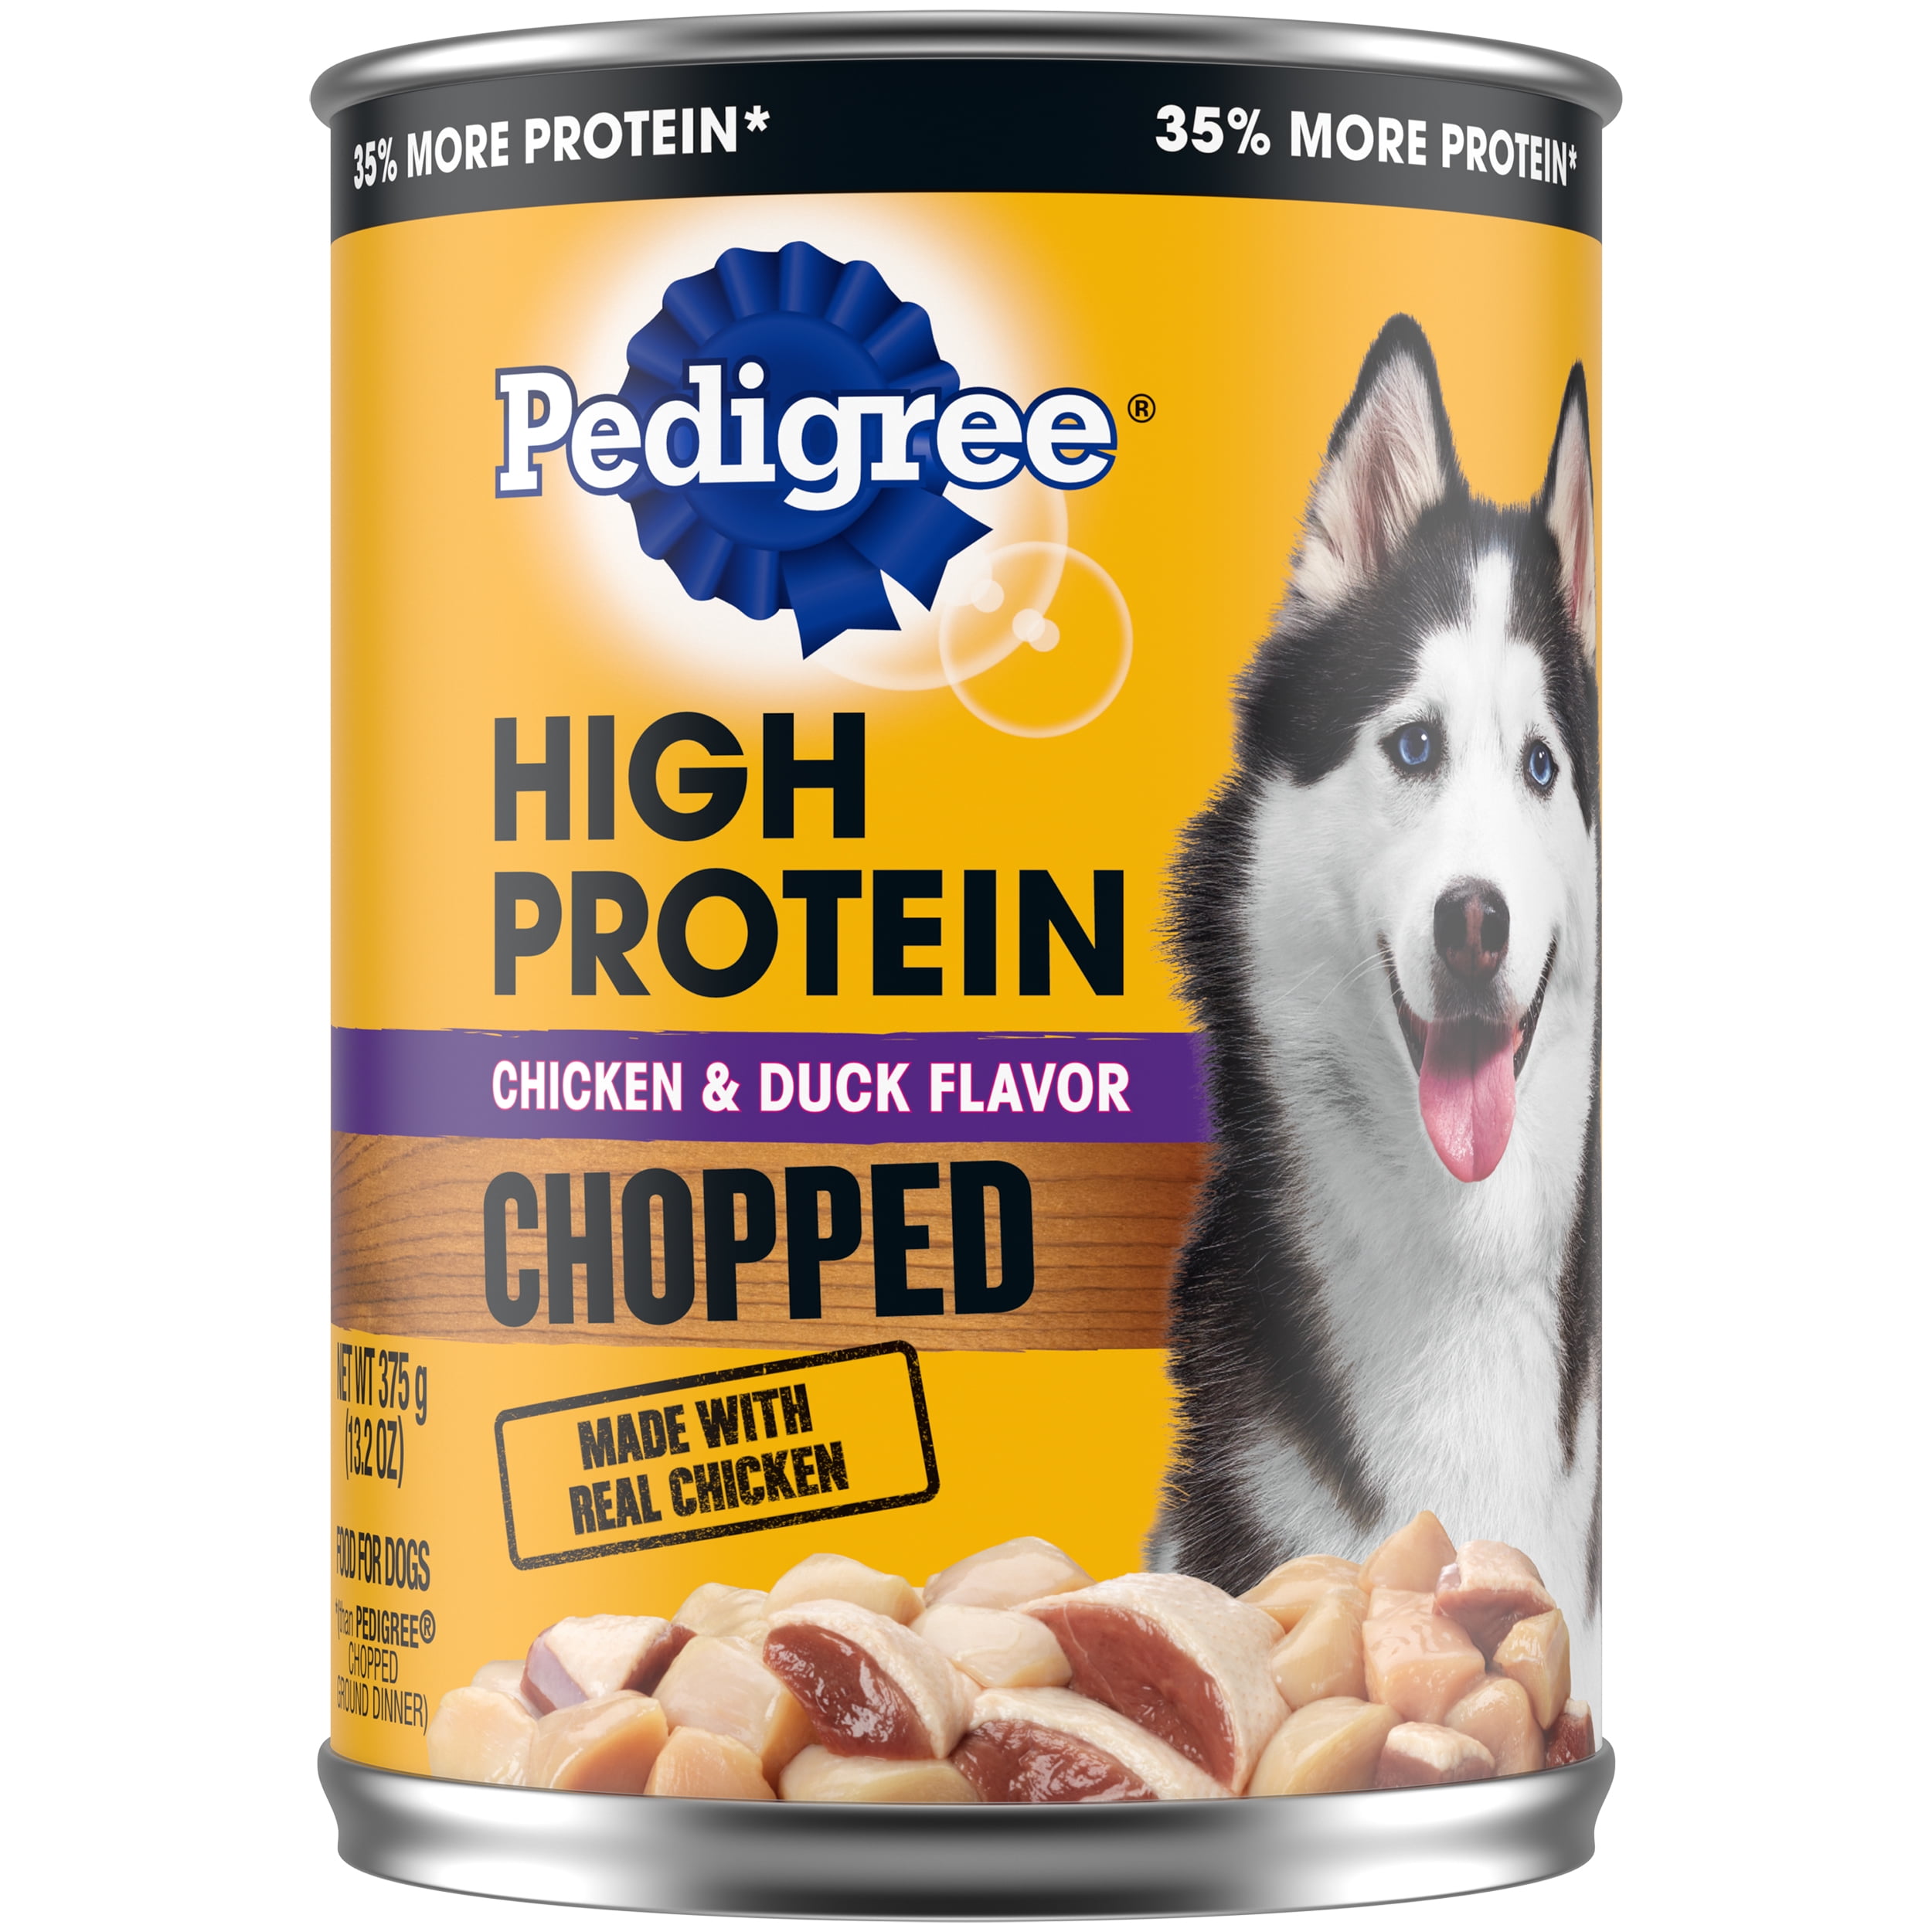 Pedigree High Protein Chopped Chicken & Duck Flavor Canned Soft Wet Dog Food for Adult Dogs, 13.2 oz. Can